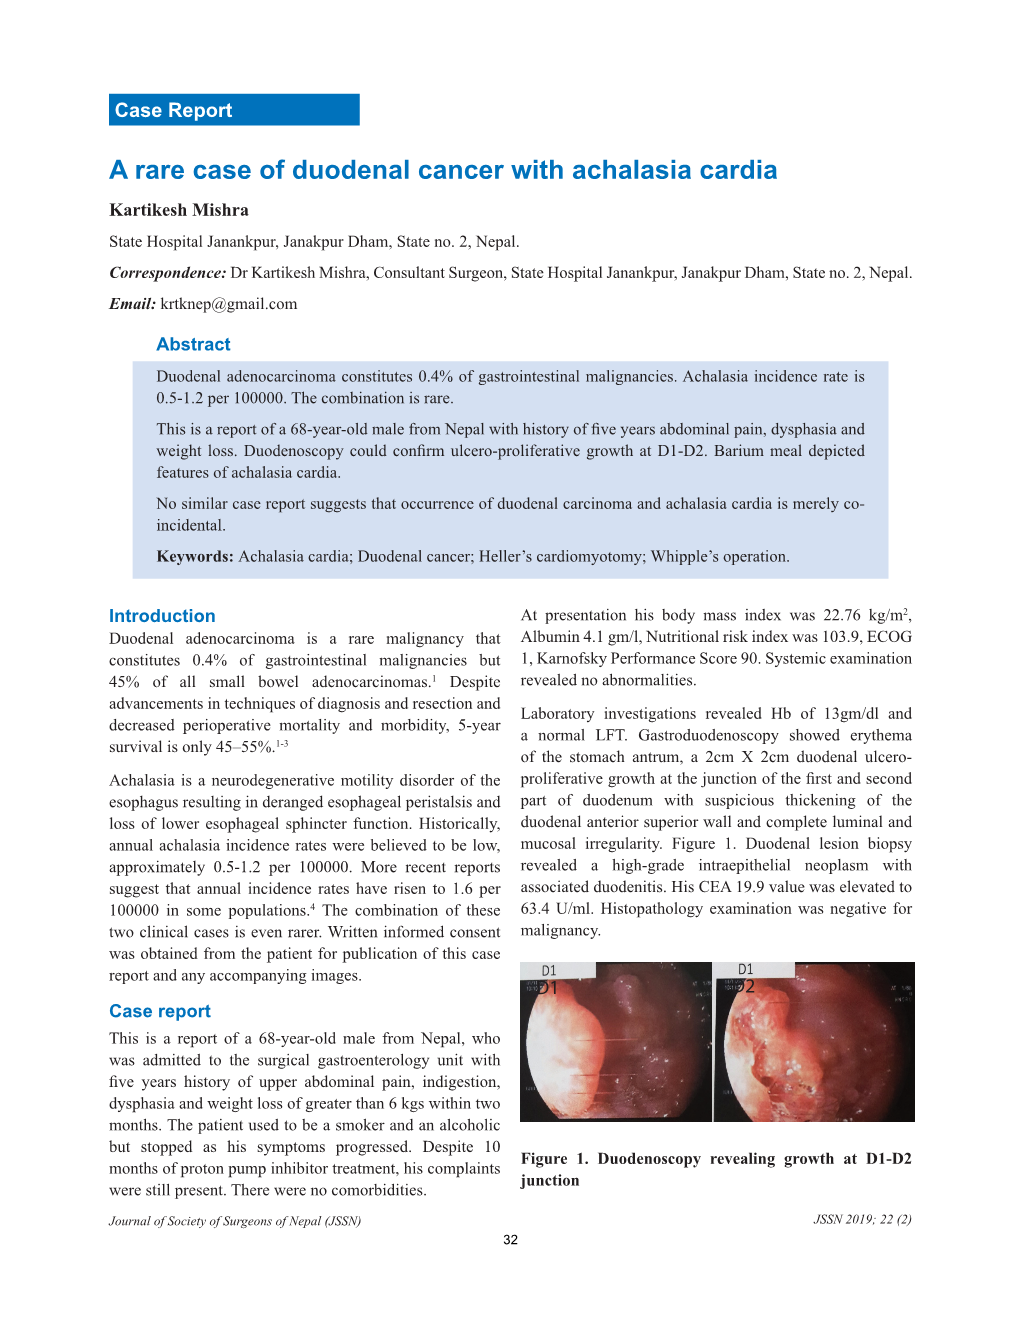 A Rare Case of Duodenal Cancer with Achalasia Cardia Kartikesh Mishra State Hospital Janankpur, Janakpur Dham, State No